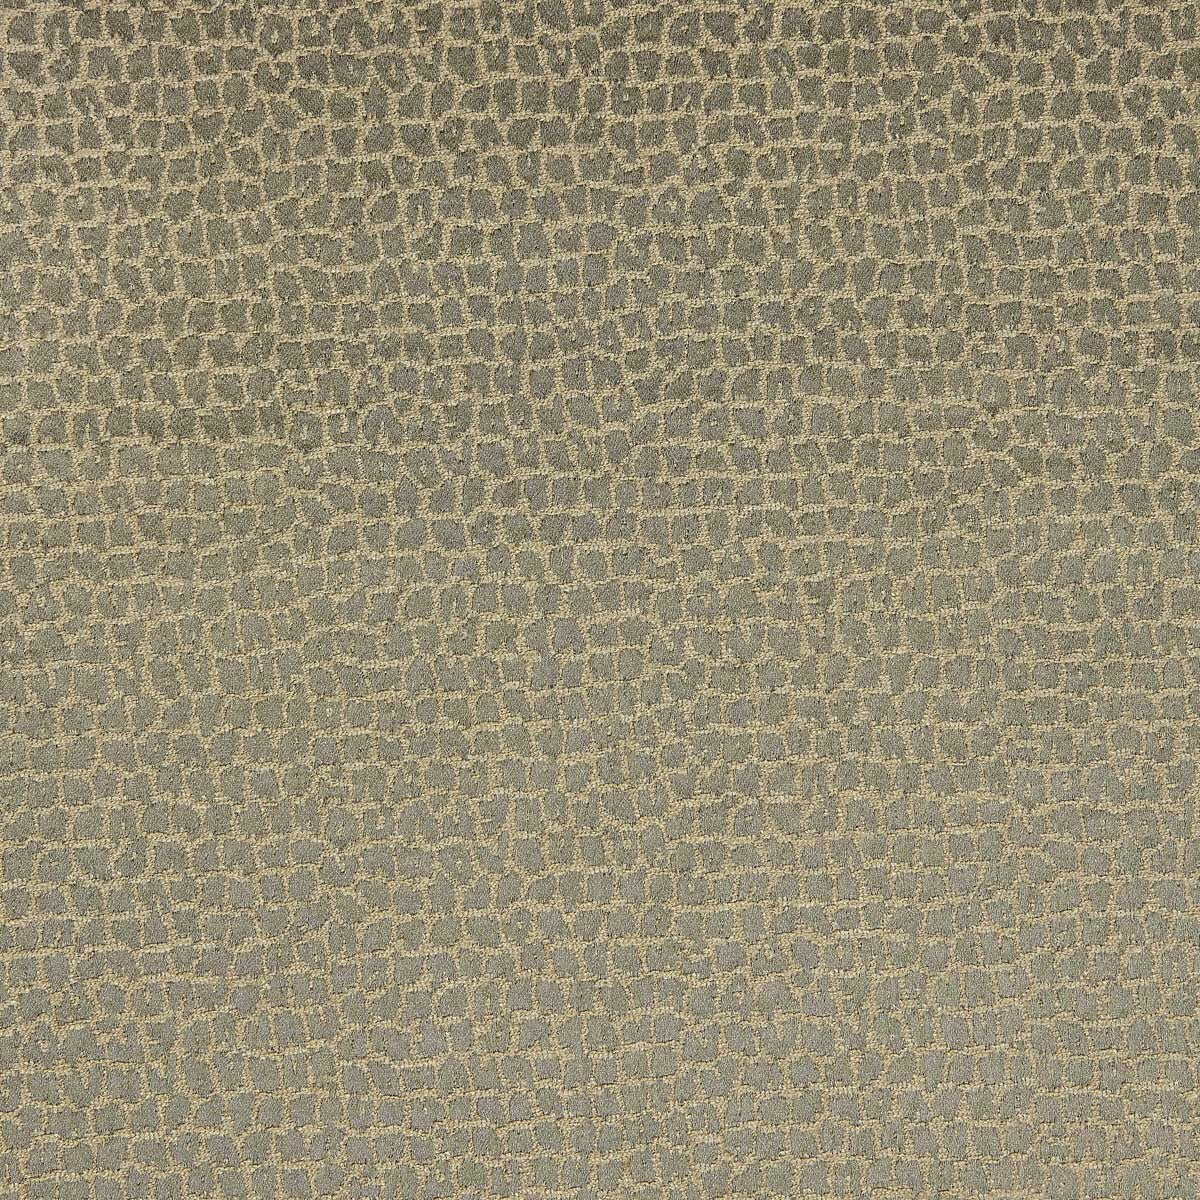 Gaudi fabric in 19 color - pattern LZ-30410.19.0 - by Kravet Couture in the Lizzo collection